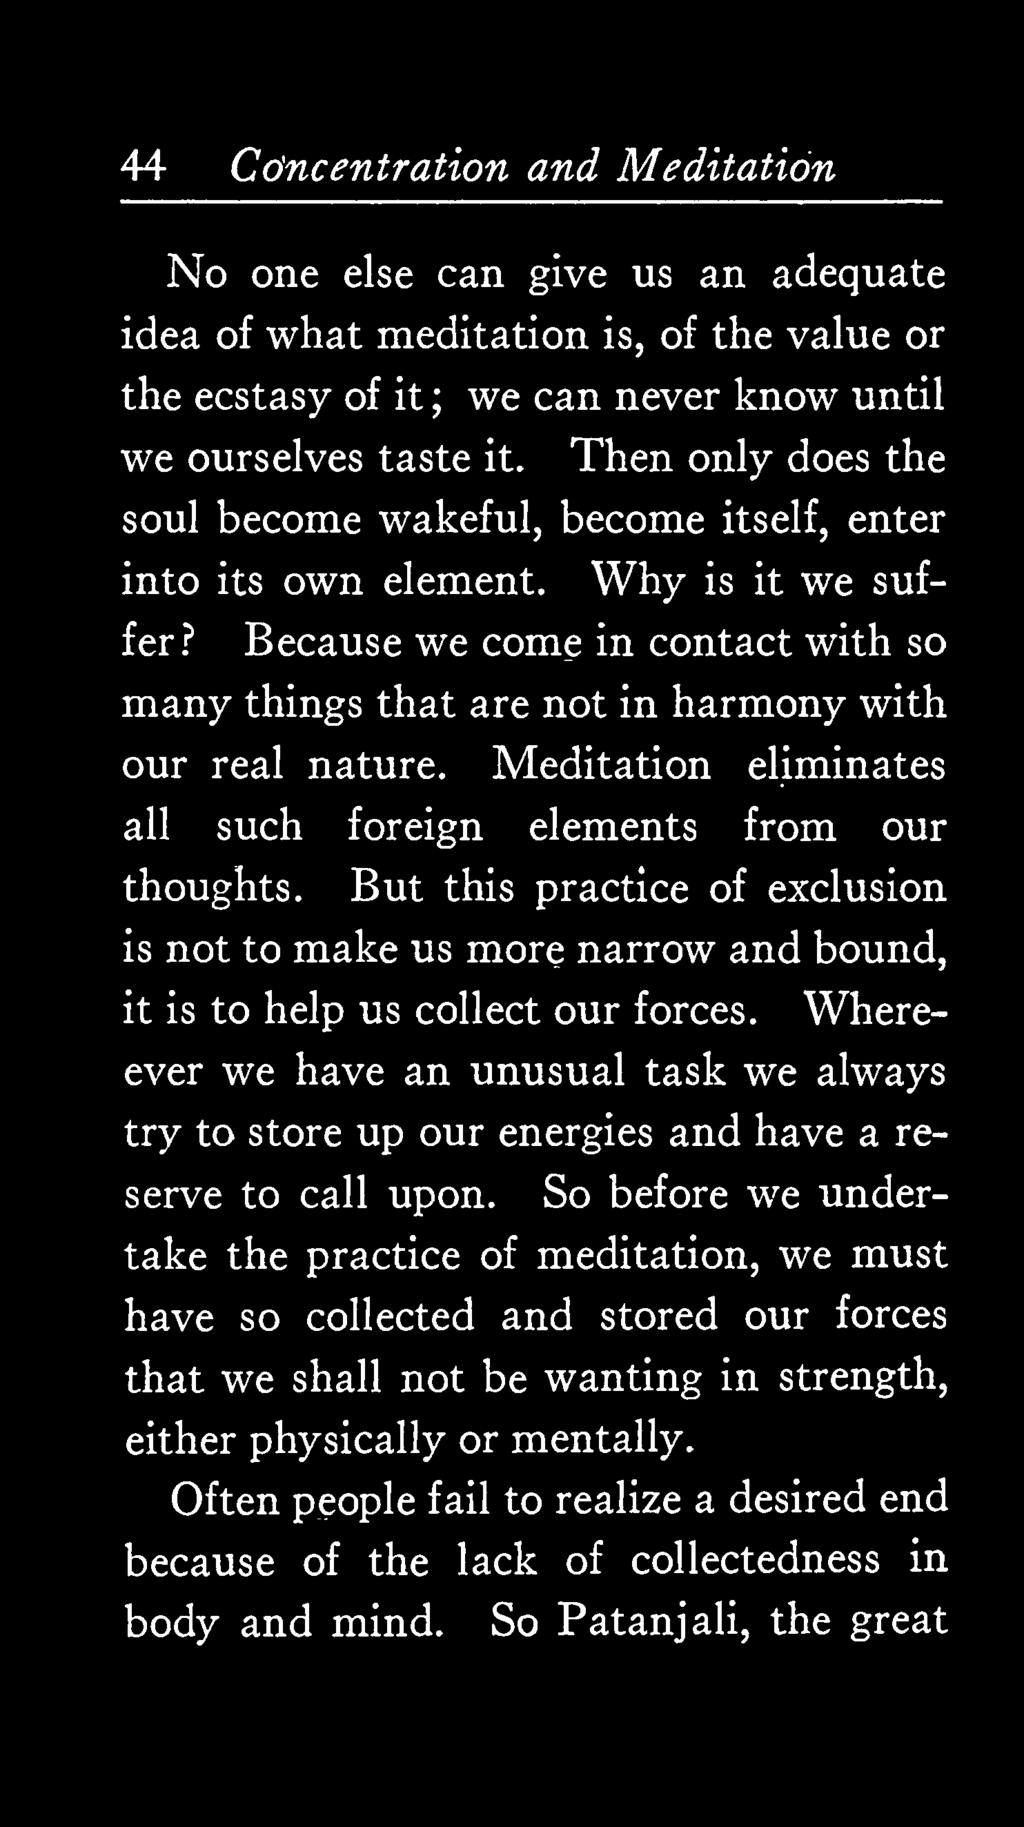 Because we come in contact with so many things that are not in harmony with our real nature. Meditation eliminates all such foreign elements from our thoughts.